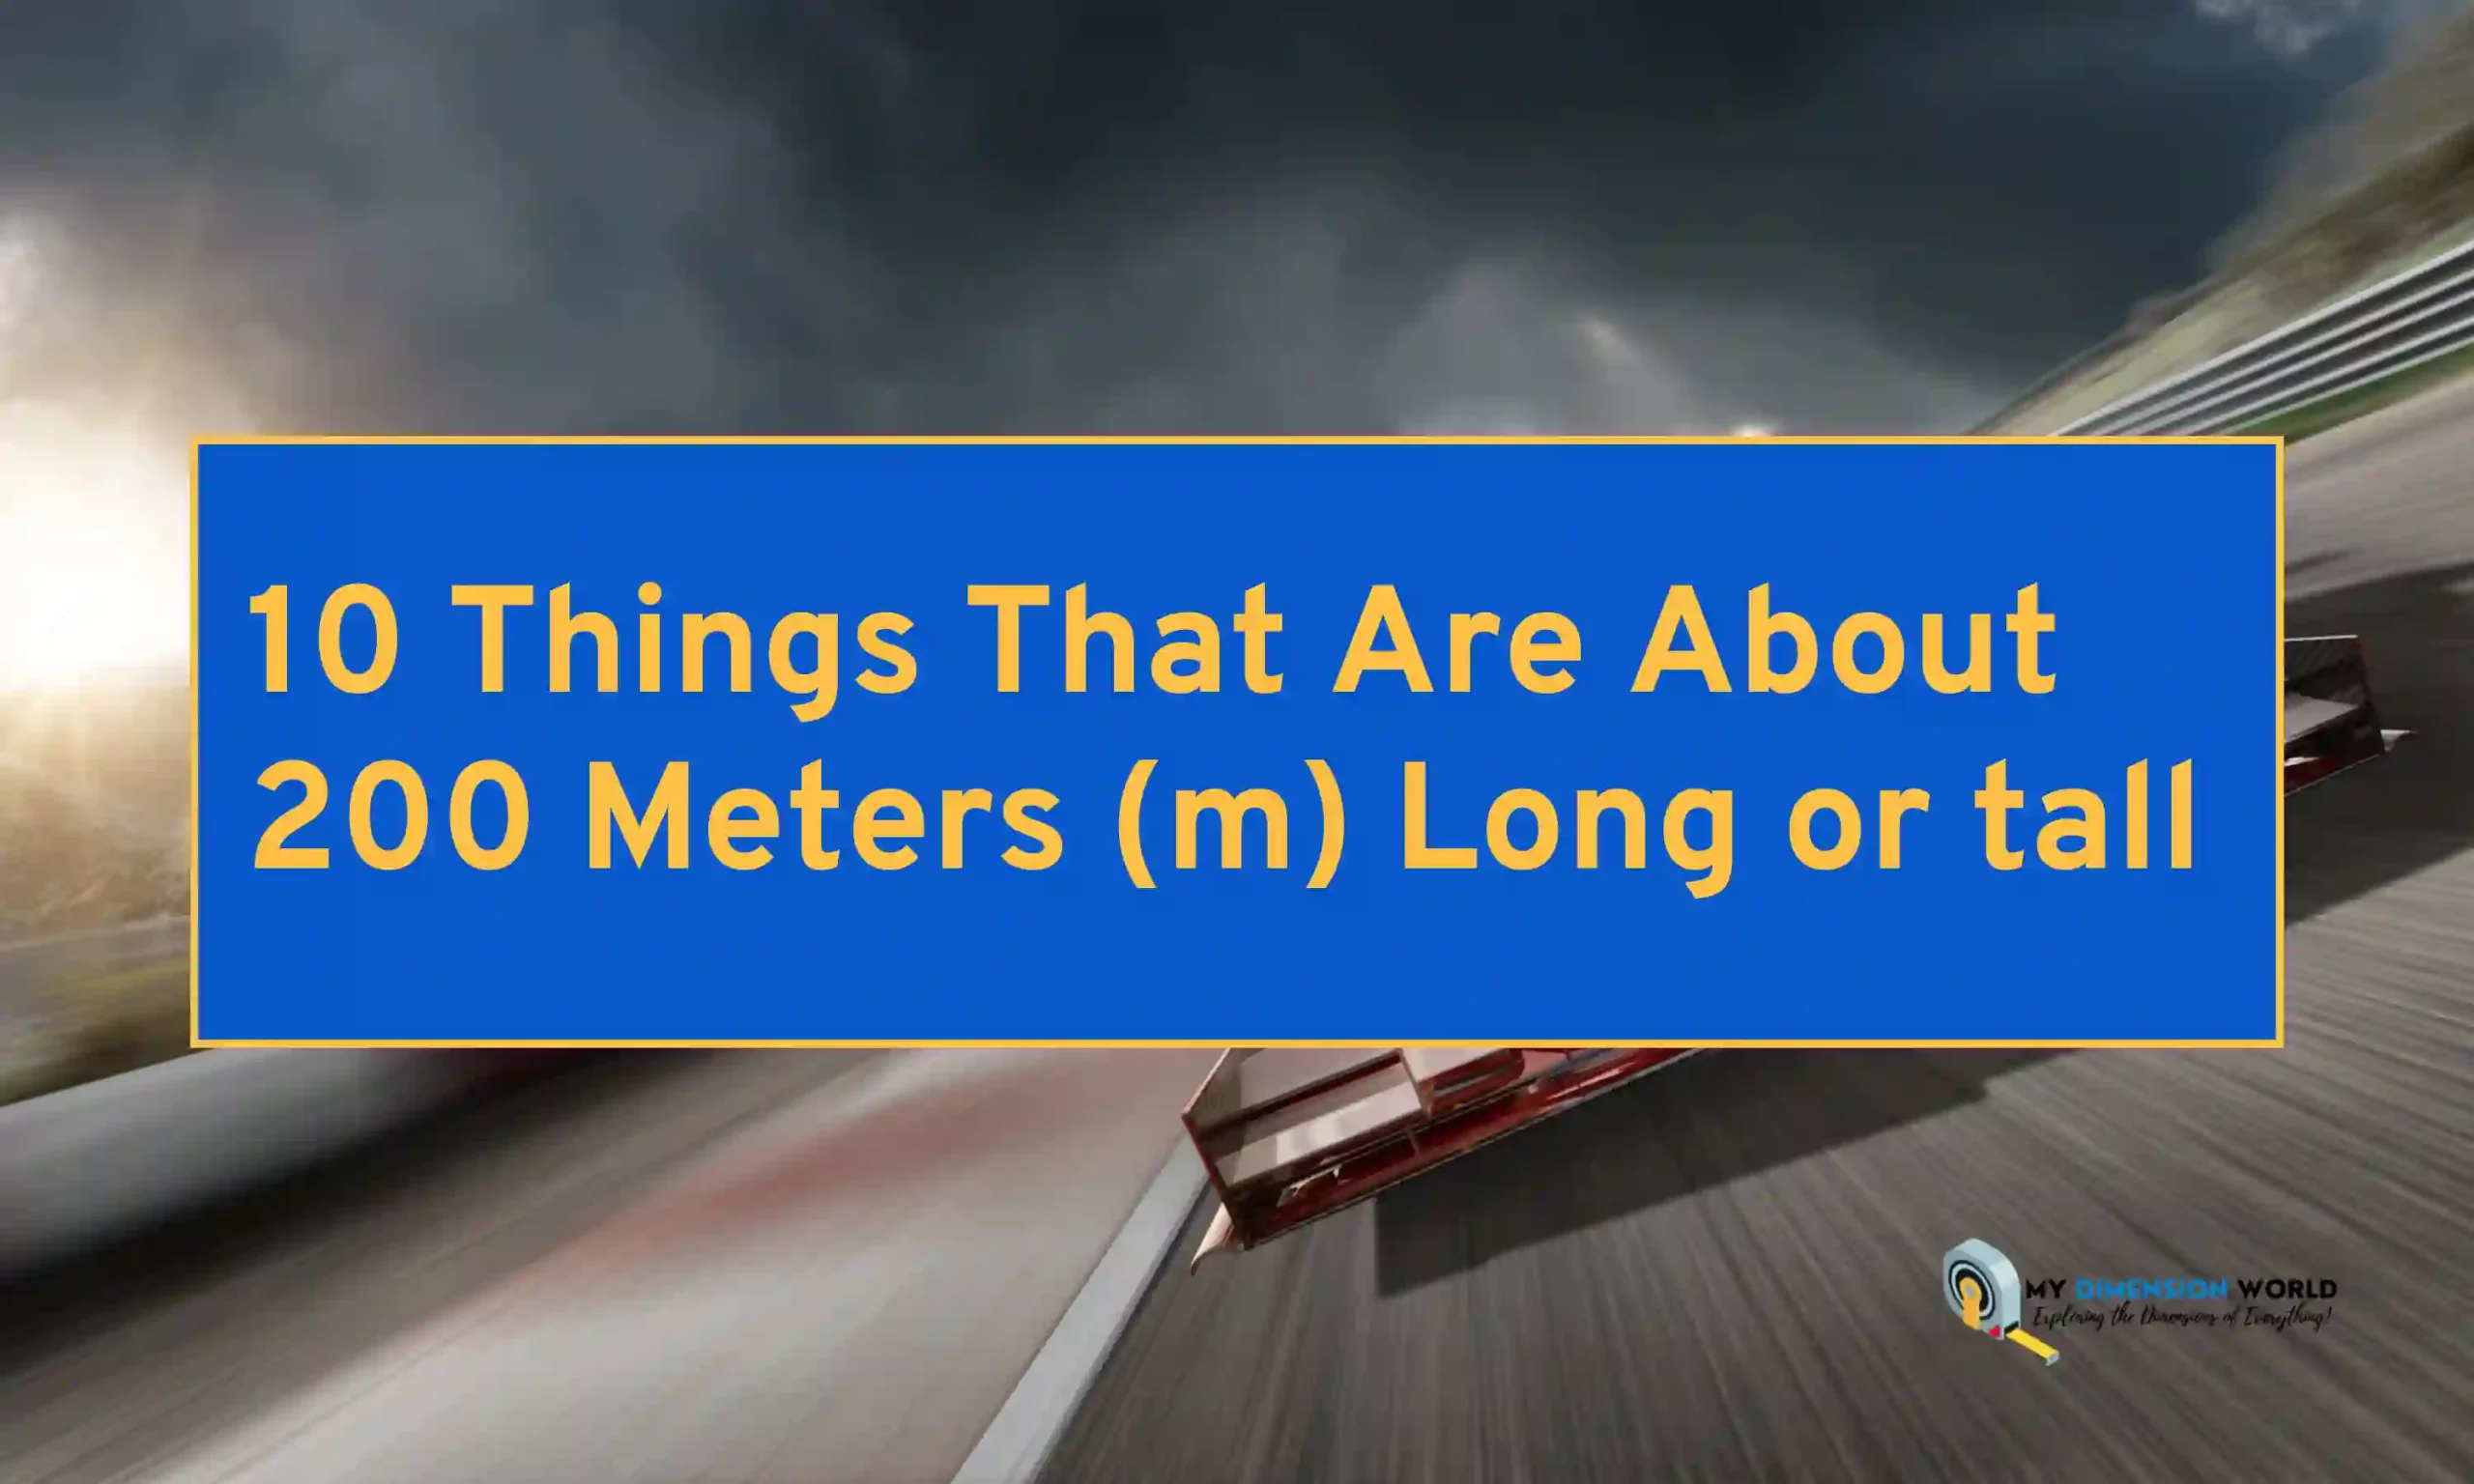 10 Things That Are About 200 Meters (m) Long or tall